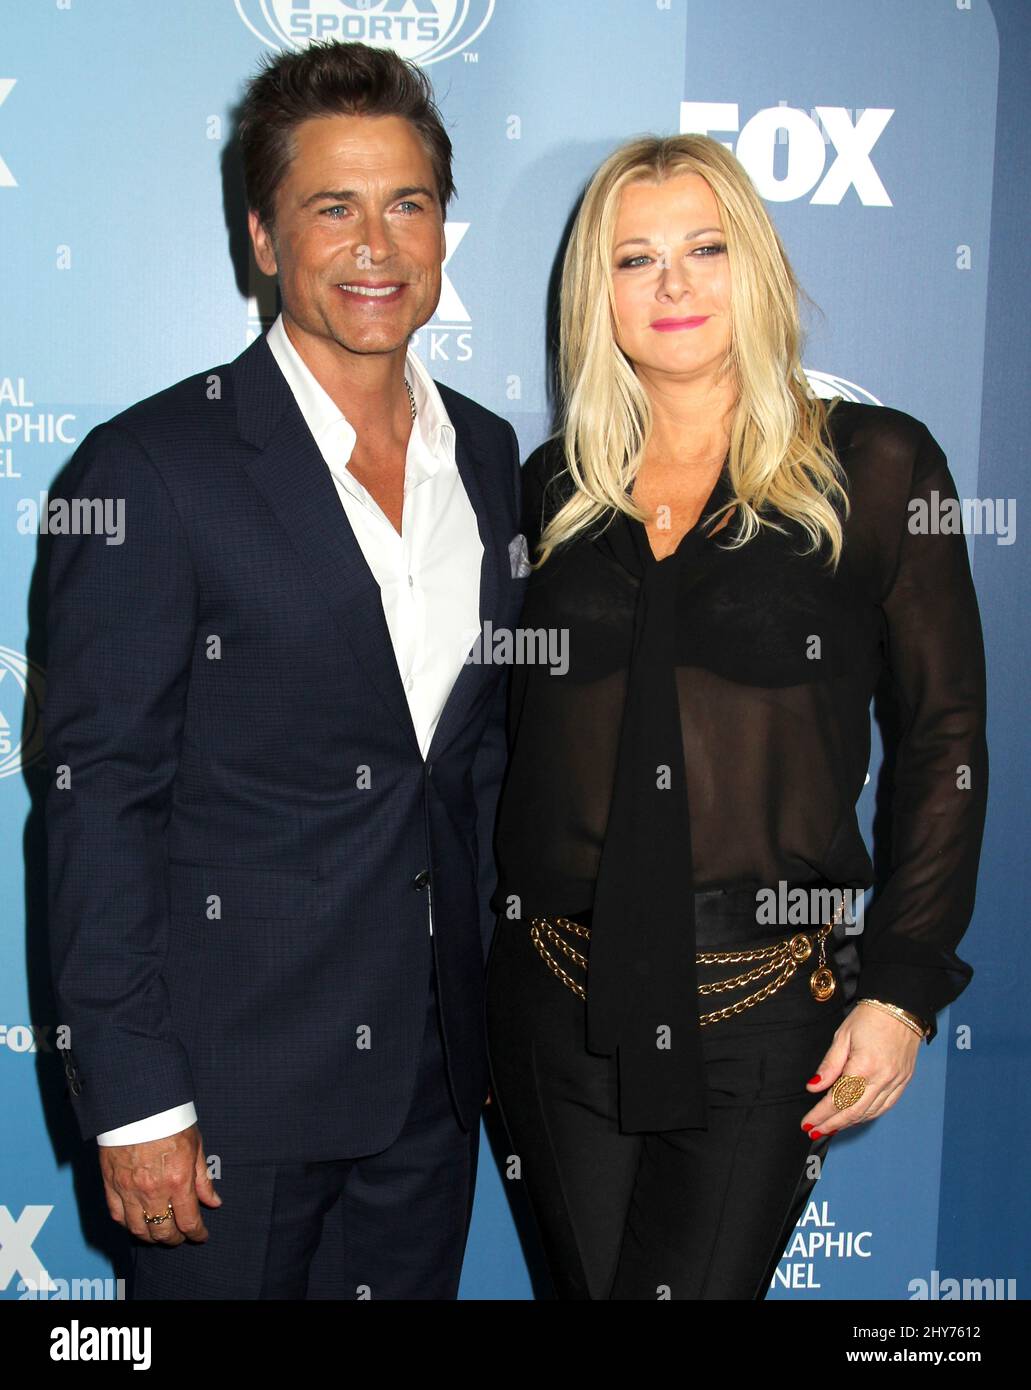 Rob Lowe and Sheryl Berkoff (wife) attending the 2015 Fox Upfront Presentation in New York. Stock Photo